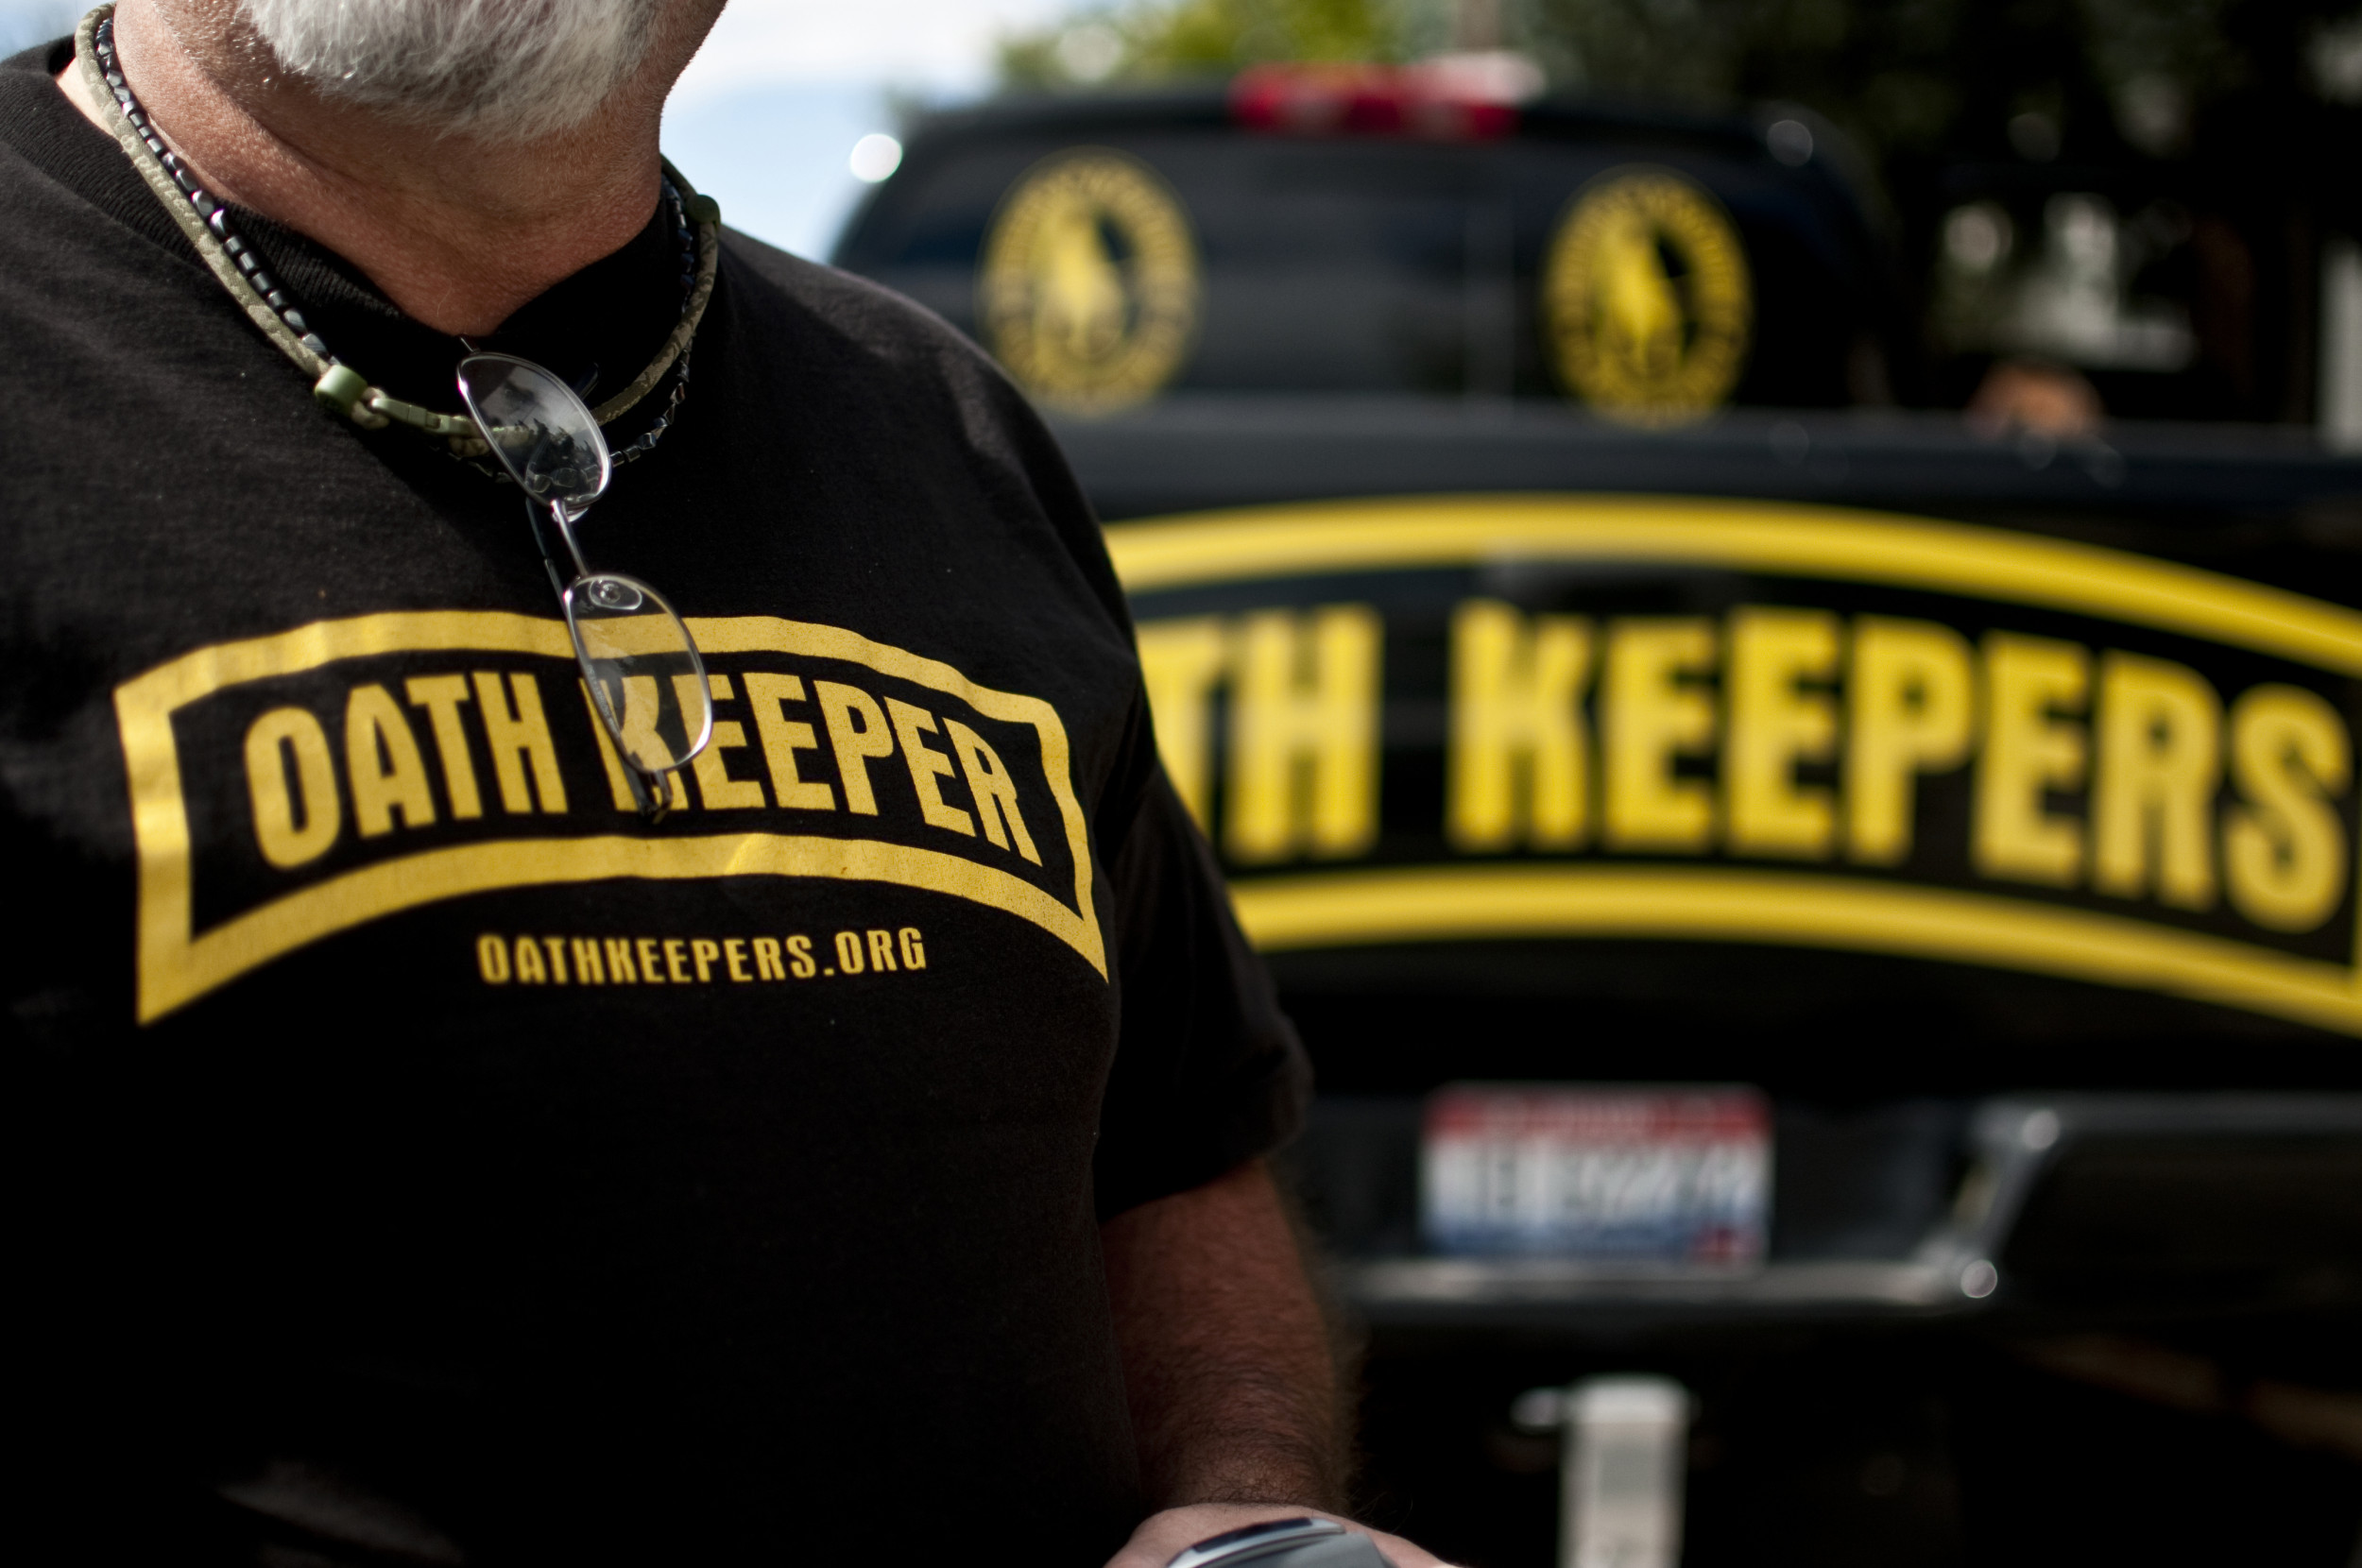 Oath Keepers have chapters across the U.S.